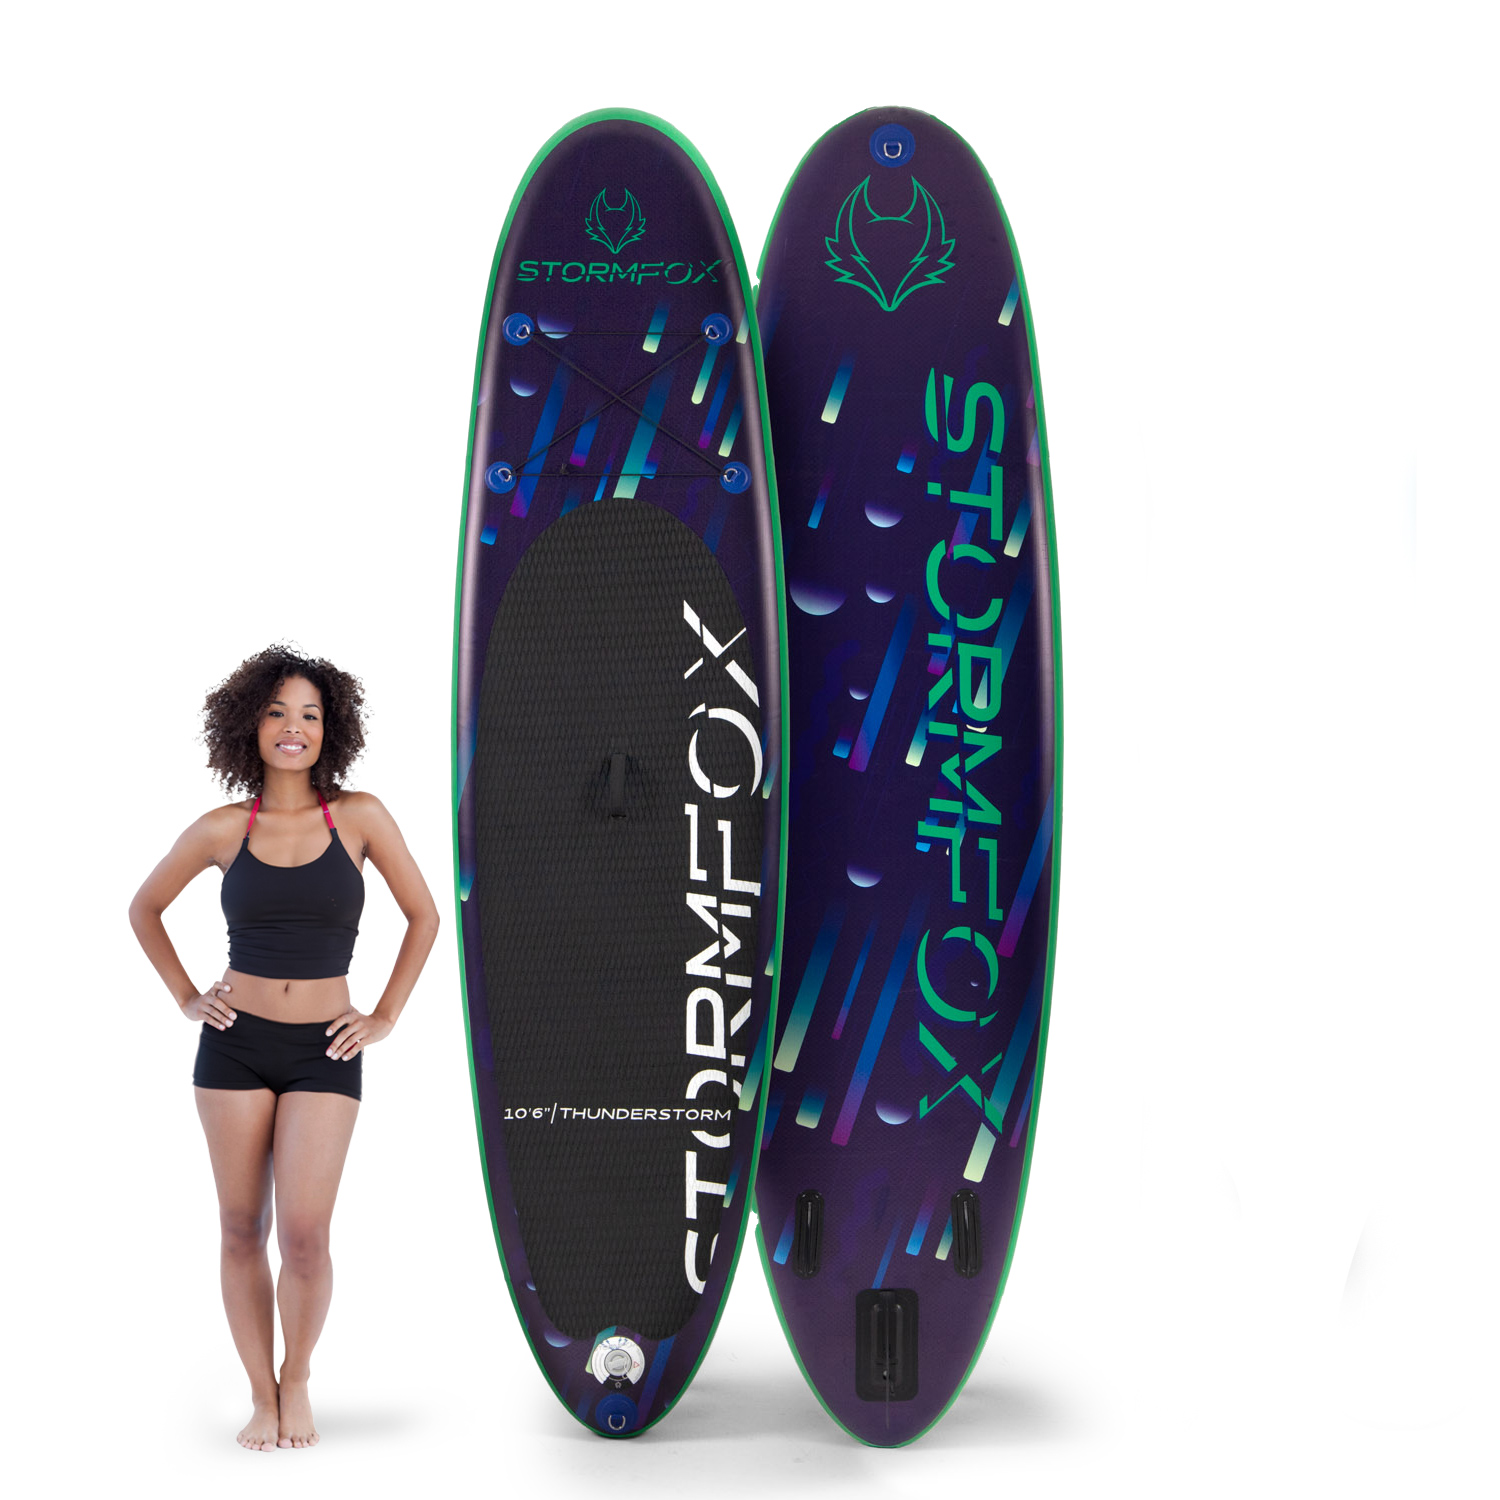 Thunderstorm Stand Up Paddle Board Kit - 10'6